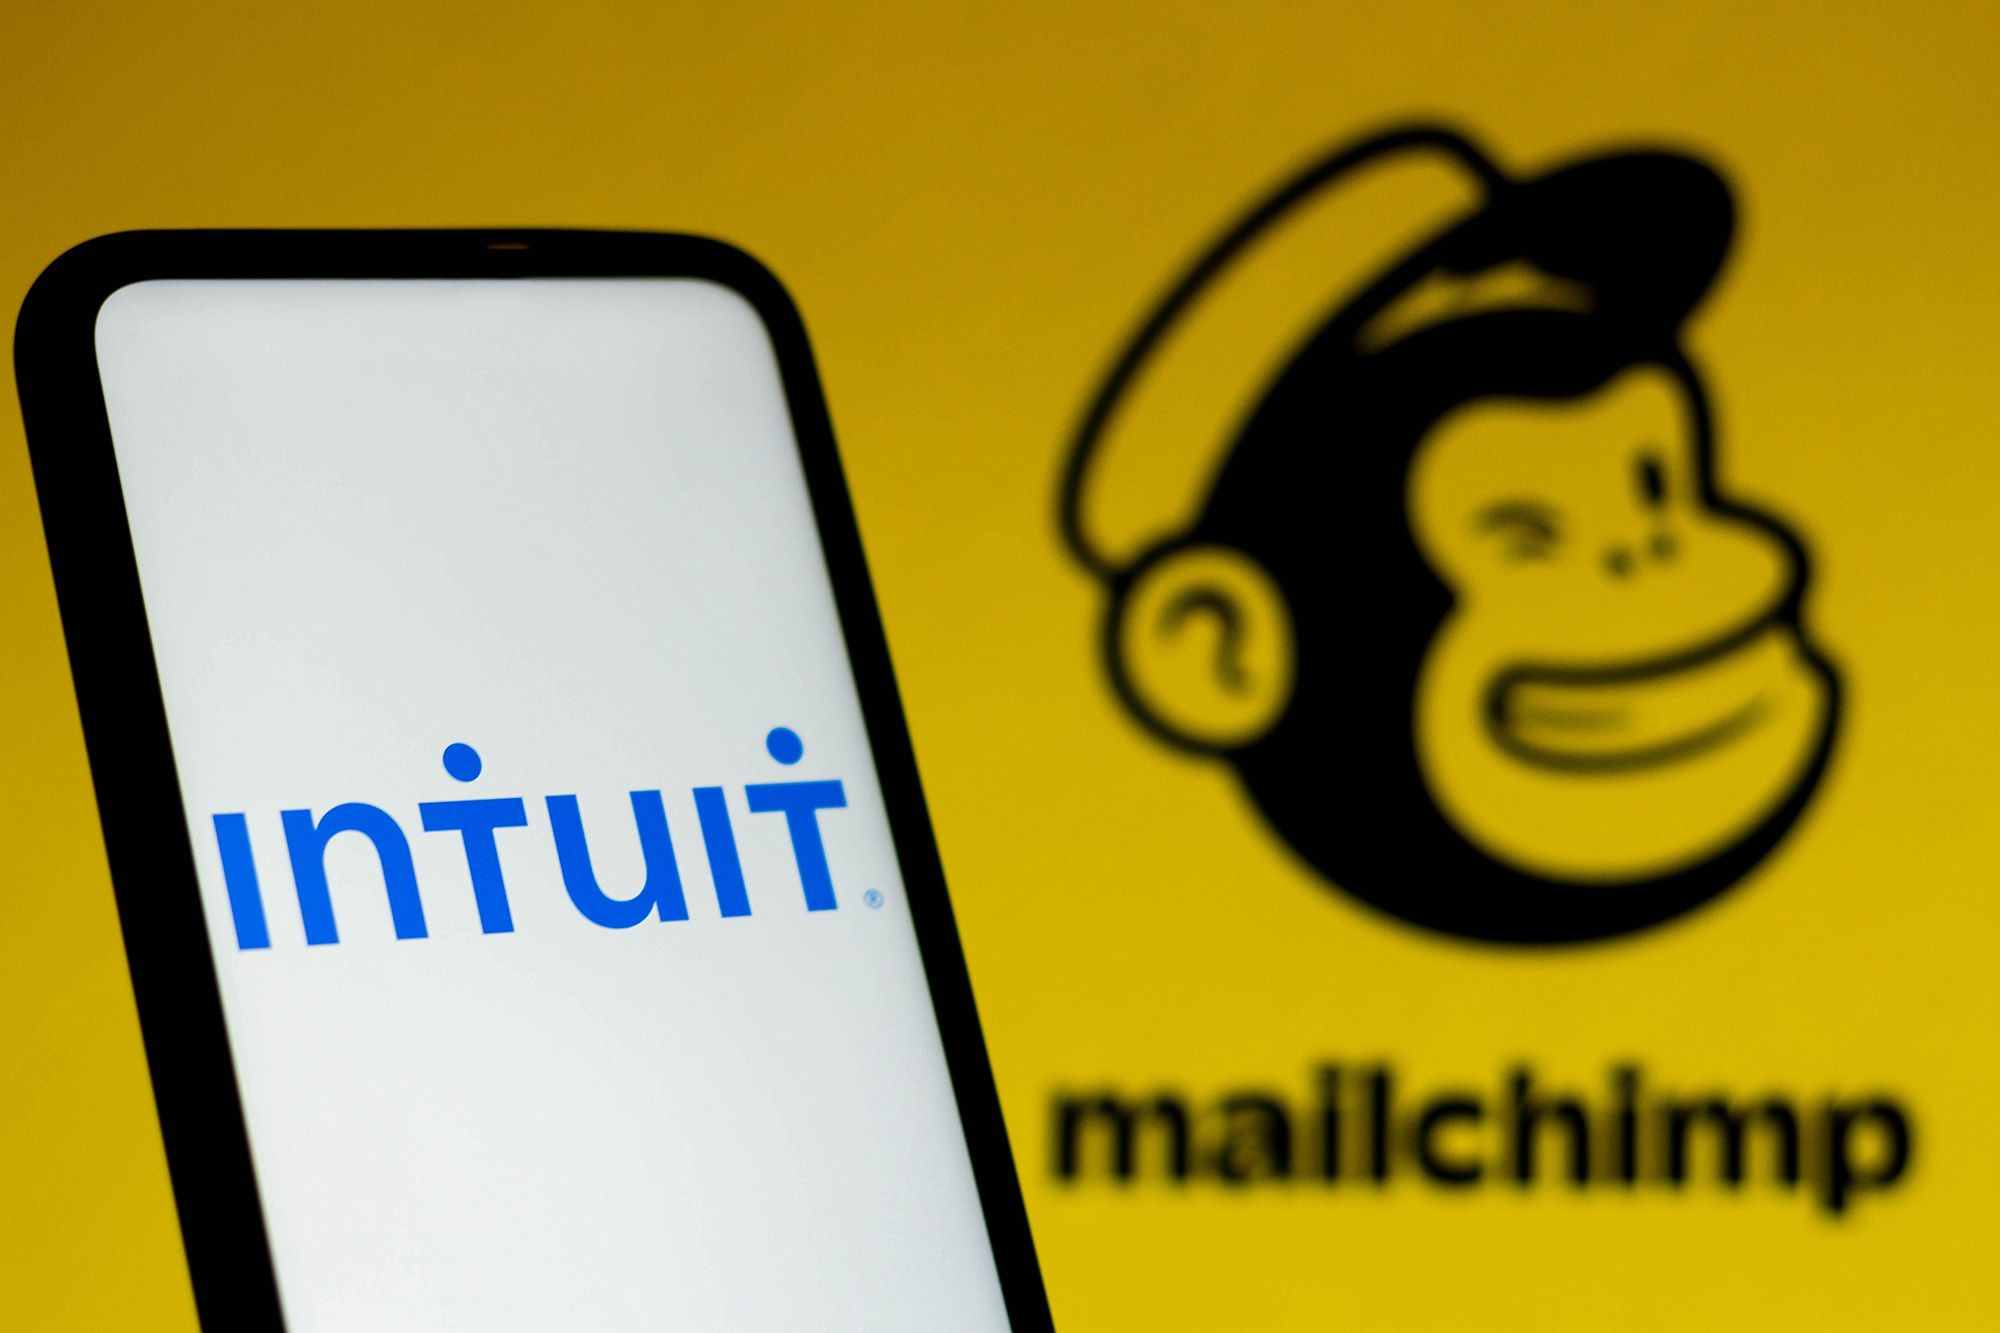 Intuit to Buy Mailchimp, Startup Creating Water from Air Moves to Tampa, Abby Leibowitz Appears on SOUTH POD